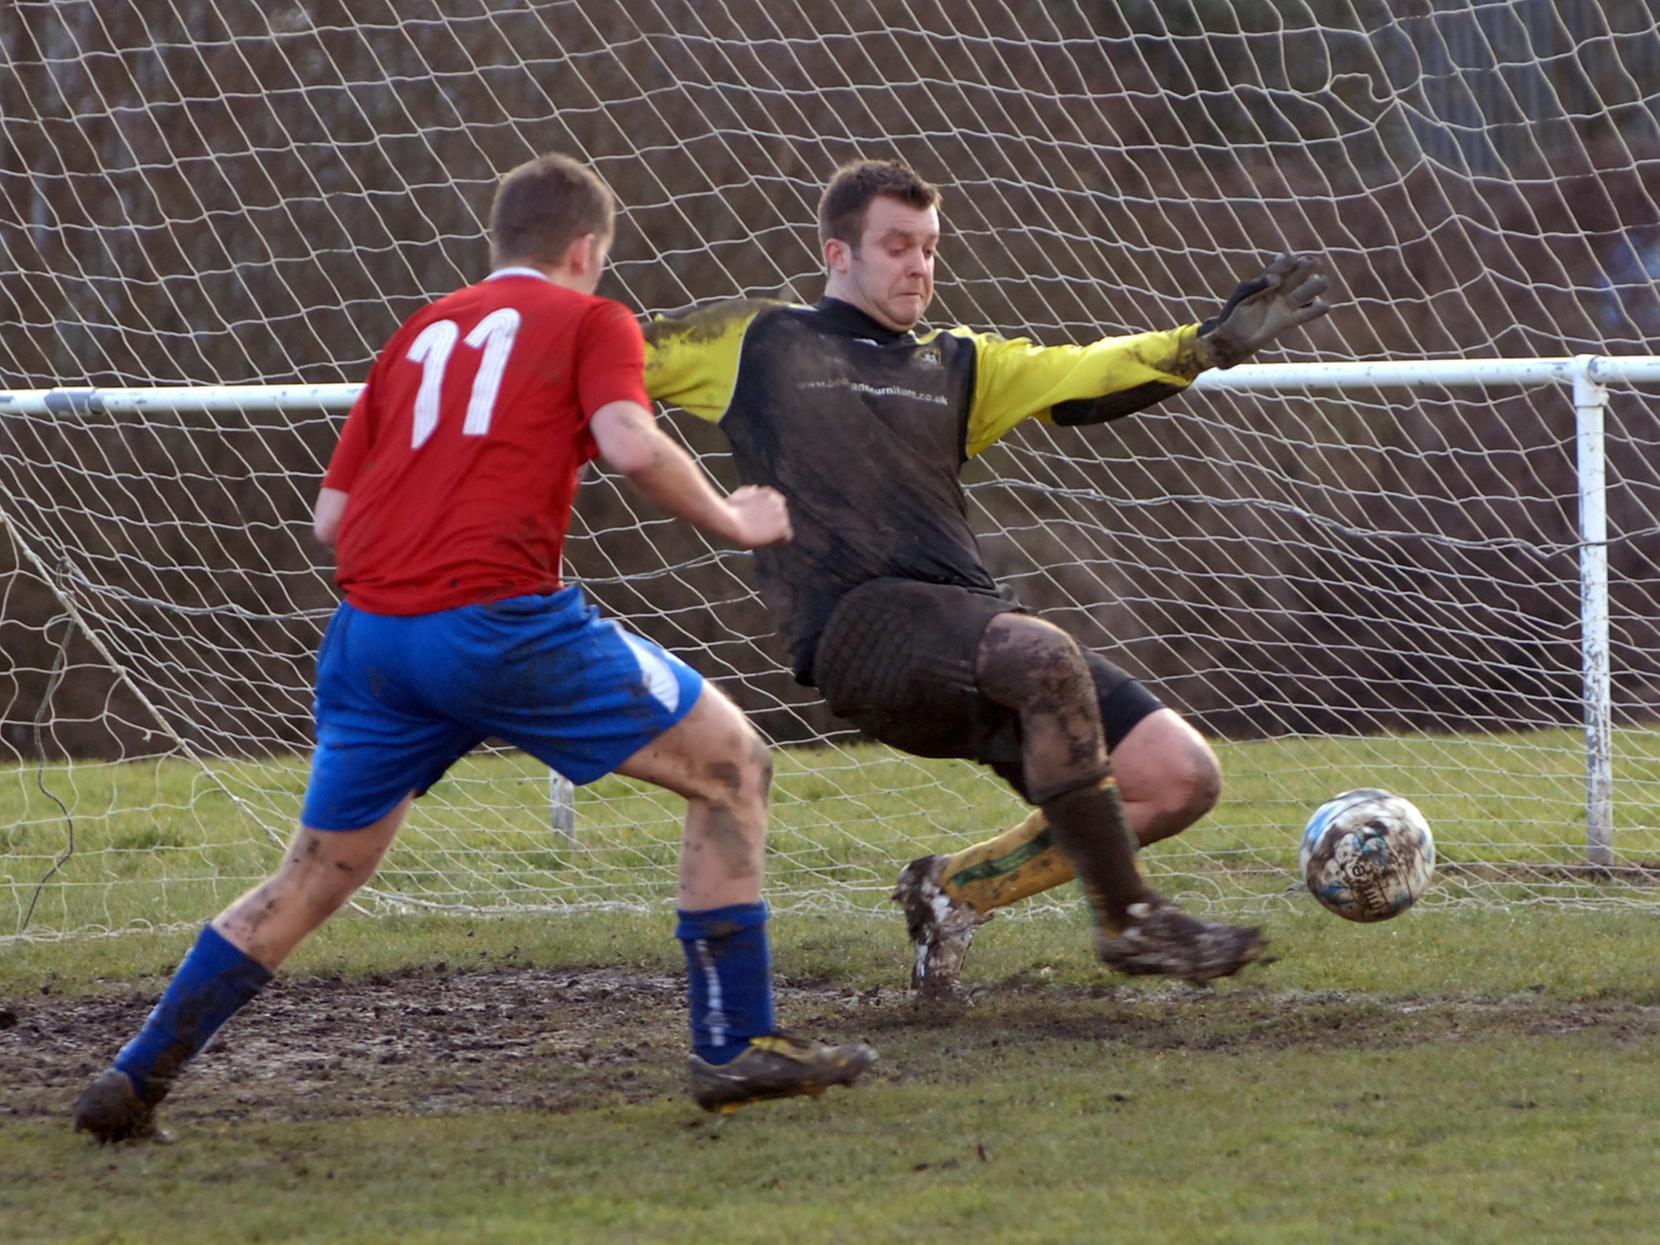 Chris Linfoor in the Hunslet Res goal saves from Mark Jackson of Churwell FC.